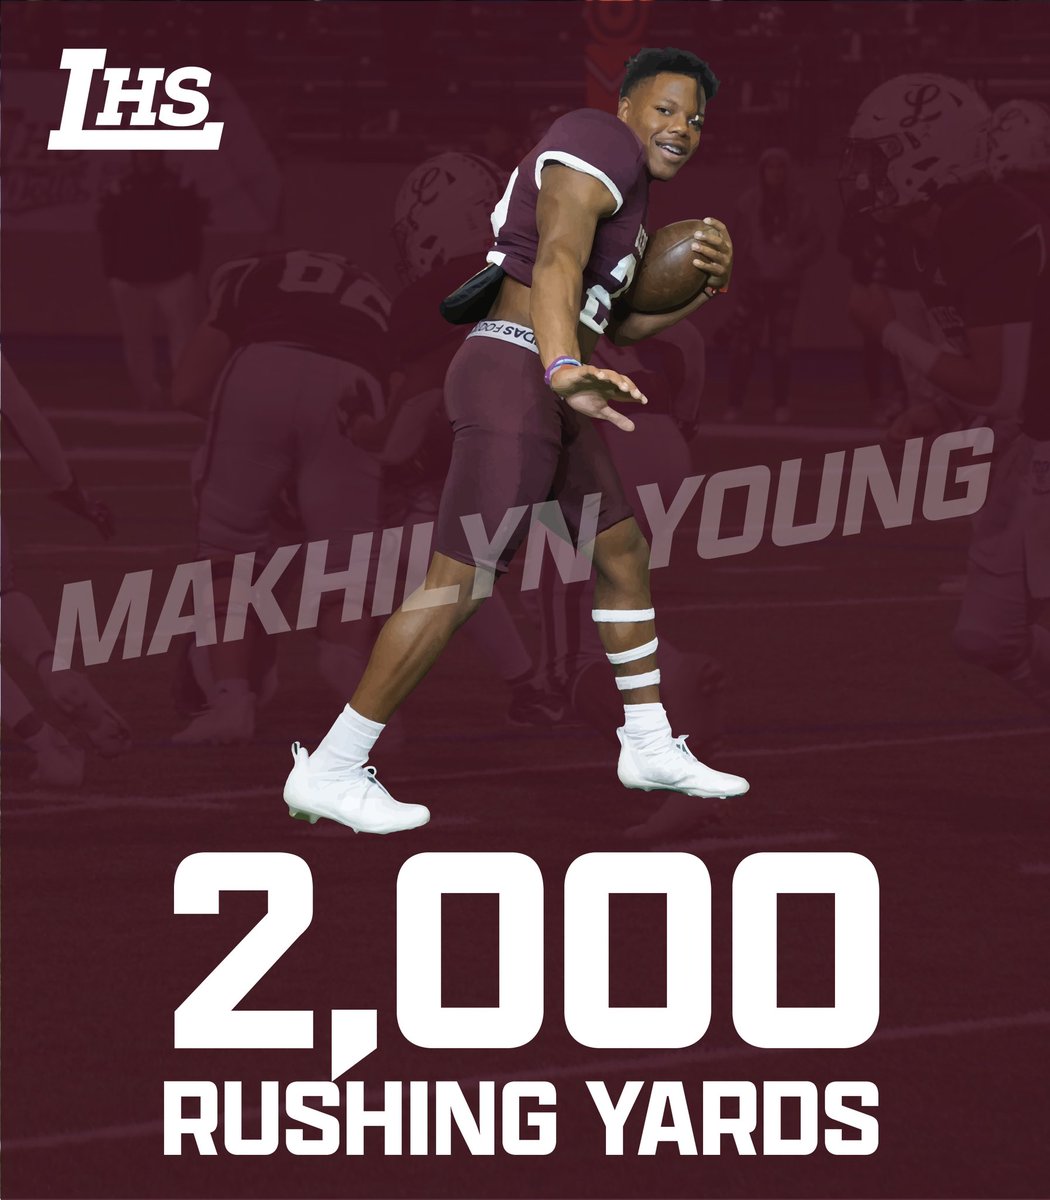 With tonight’s performance, Makhilyn Young joined Farris Strambler and Cedric Benson as only the players in school history to rush for 2,000 yards in a single season.

An incredible accomplishment for the entire Rebel Offense! https://t.co/0GPWjUMTJI